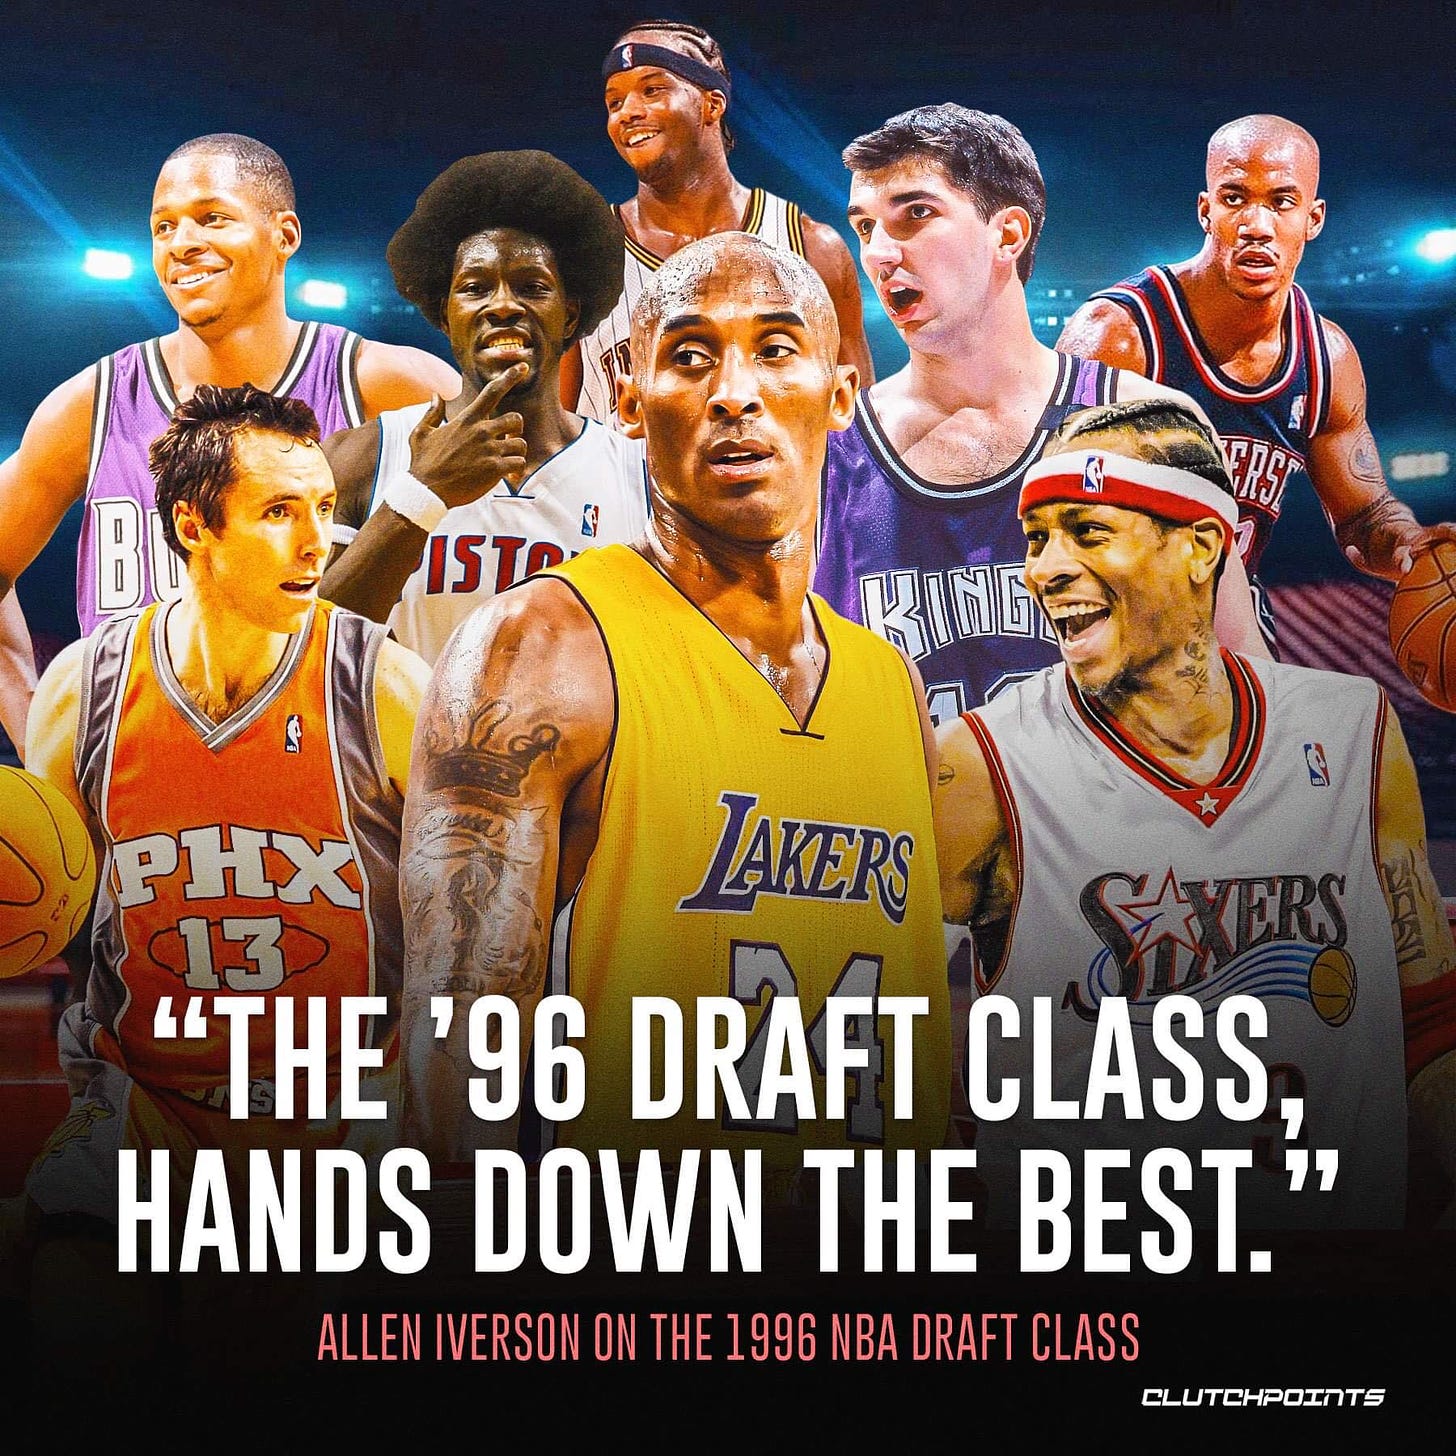 May be an image of 8 people and text that says 'BL ISTA KING PHX LAKERS SAYERS "THE '96 DRAFT CLASS, HANDS DOWN THE BEST.' ALLEN IVERSON ON THE 1996 NBA DRAFT CLASS CLUTCHPOINTS'